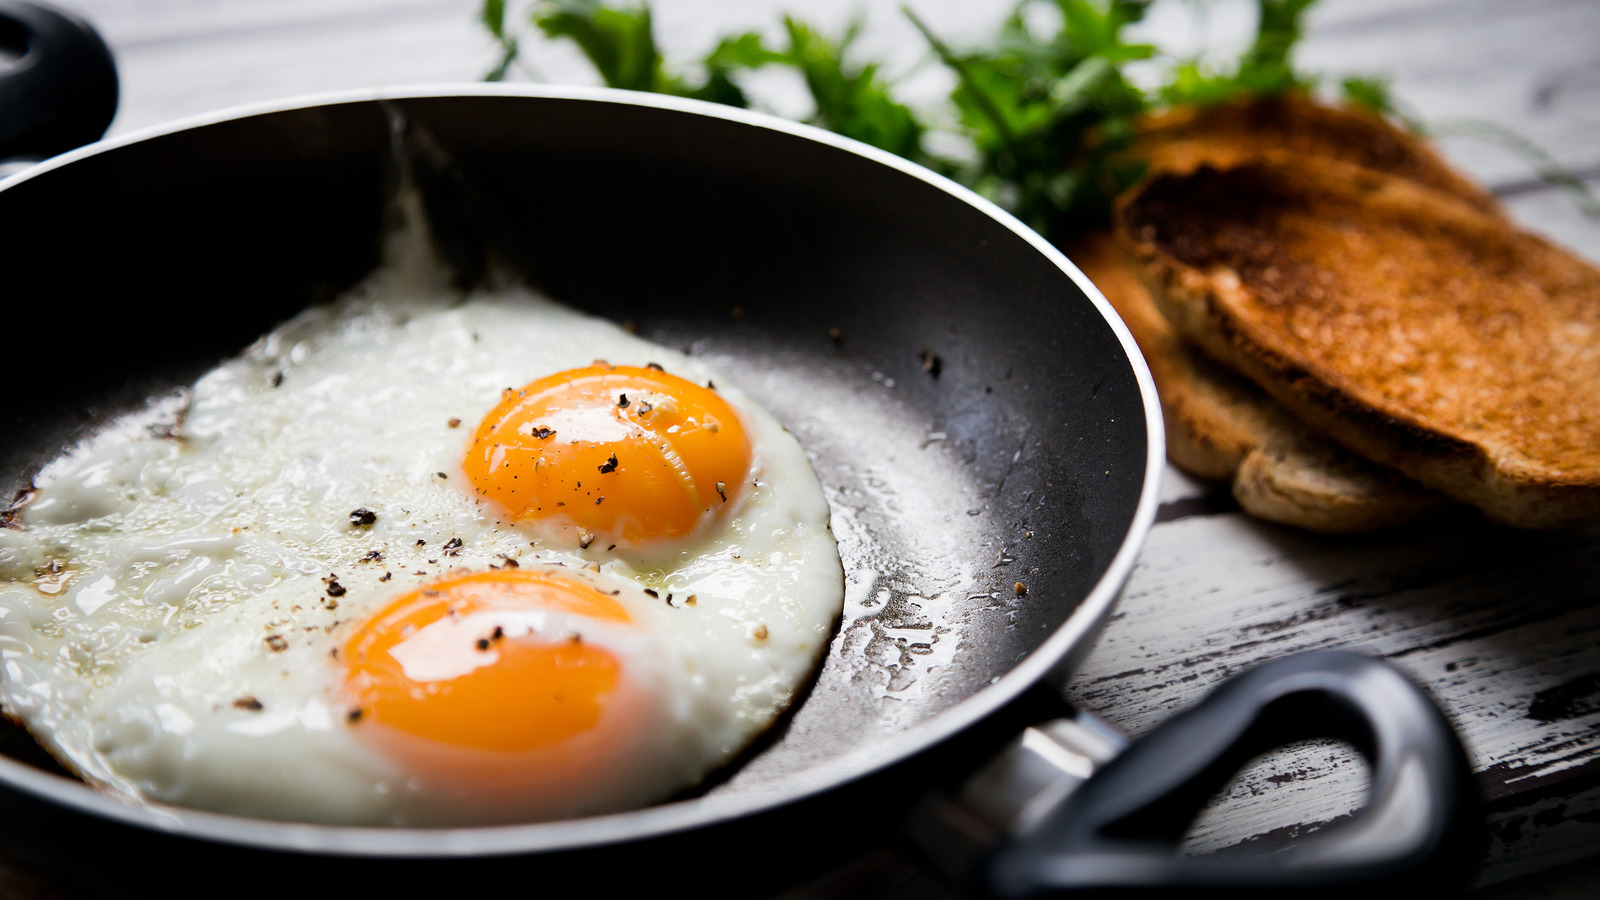 https://www.tastingtable.com/img/gallery/9-tricks-to-prevent-fried-eggs-from-spreading/l-intro-1678892679.jpg